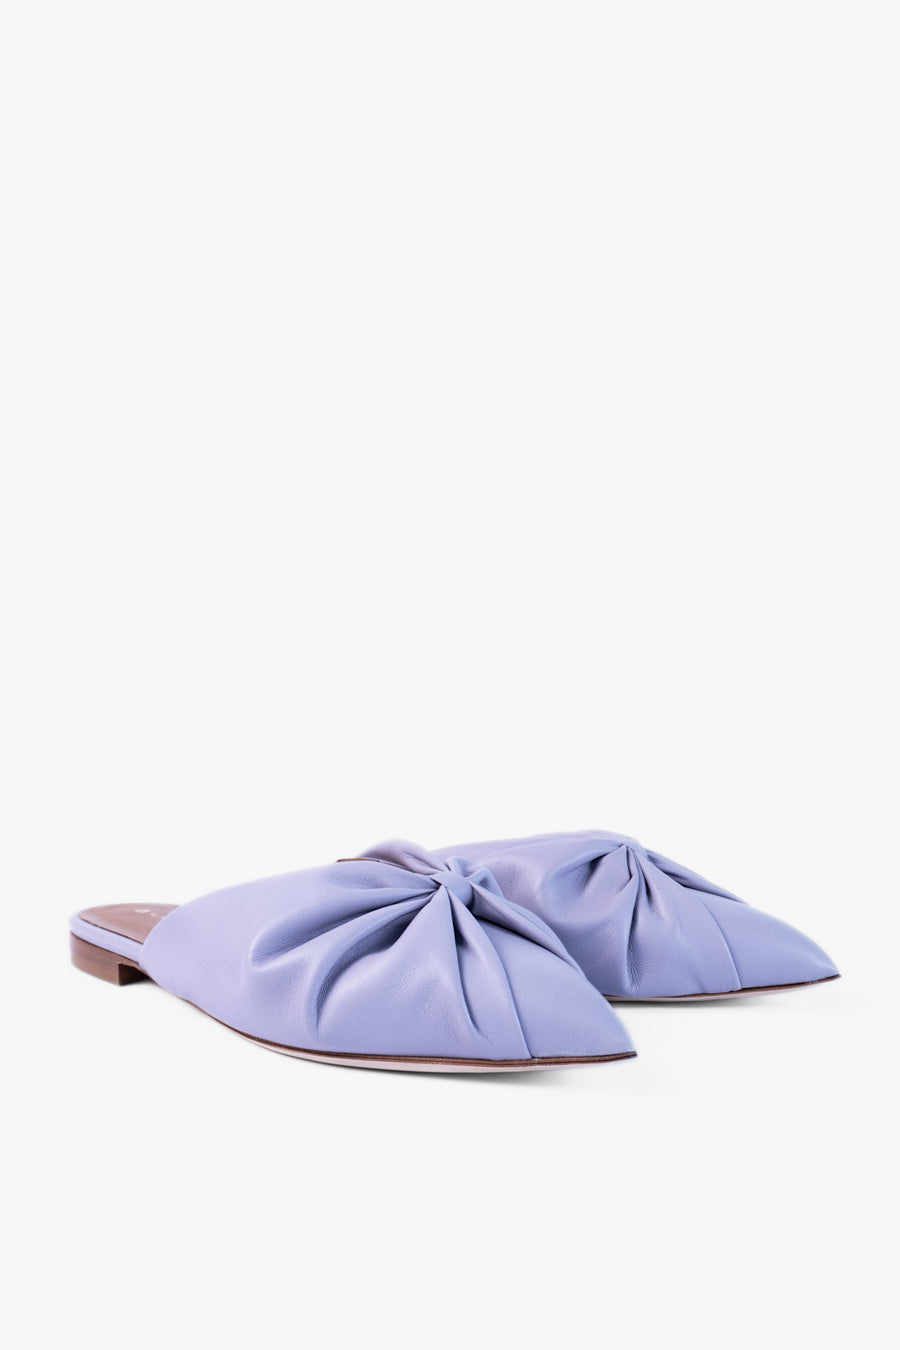 Sustainable, lilac coloured TILDA slippers with plissee, locally produced in Hamburg. Made from metal-free leather. Made in Germany by Alina Schürfeld.